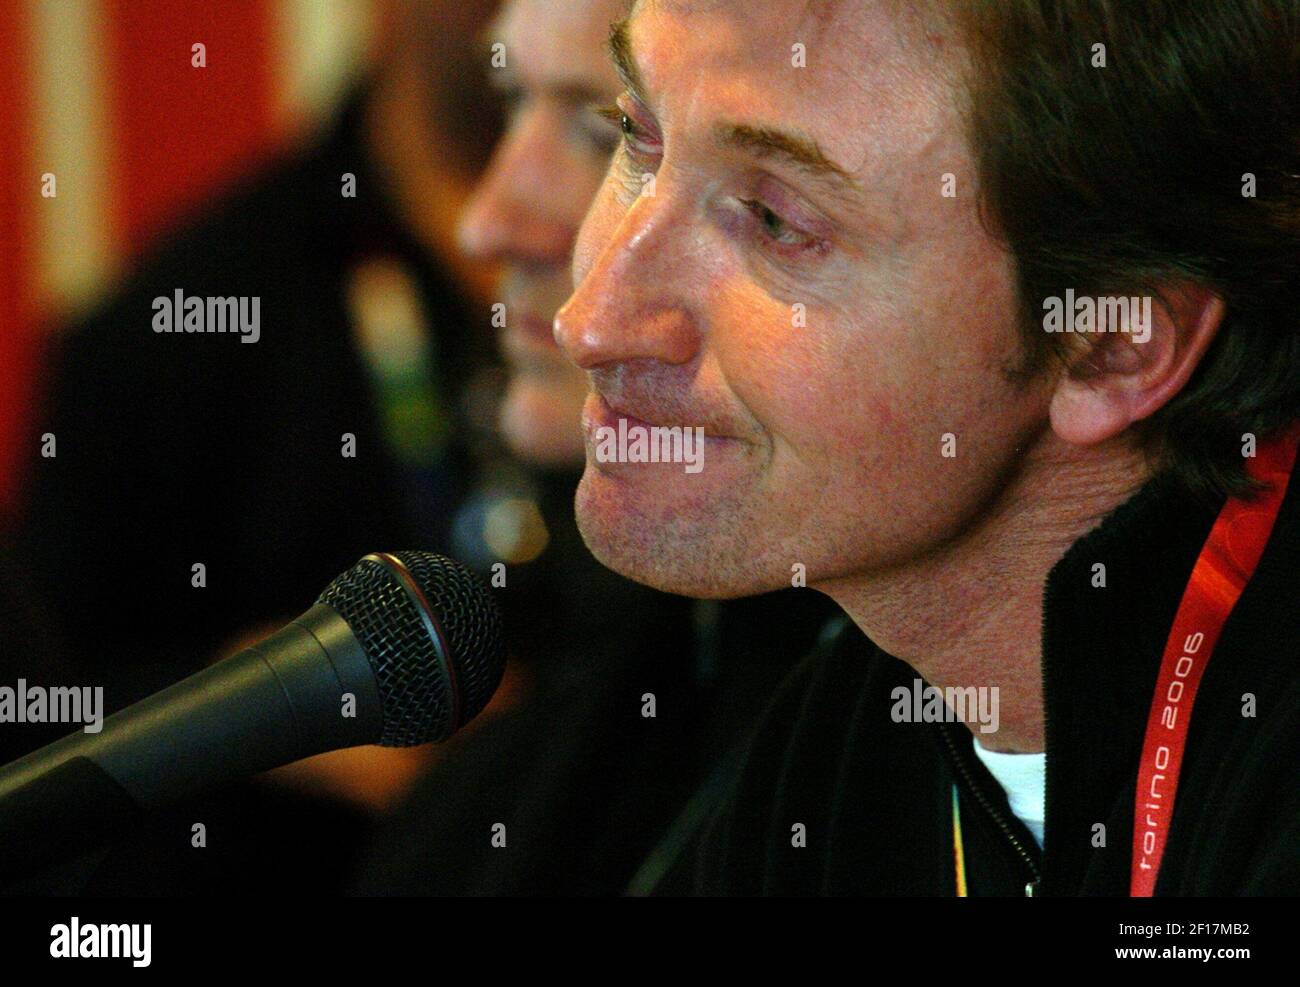 Wayne Gretzky, General Manager of the Canadian Hockey team, listens to a reporter's question during a press conference on Feburary 14, 2006 in Turin, Italy during 2006 Winter Olympic Games. Gretzky stated that he is here to focus on hockey and will not talk anymore about the recent distractions in his personal life. (Photo by Sherri LaRose/St. Paul Pioneer Press/KRT) Stock Photo